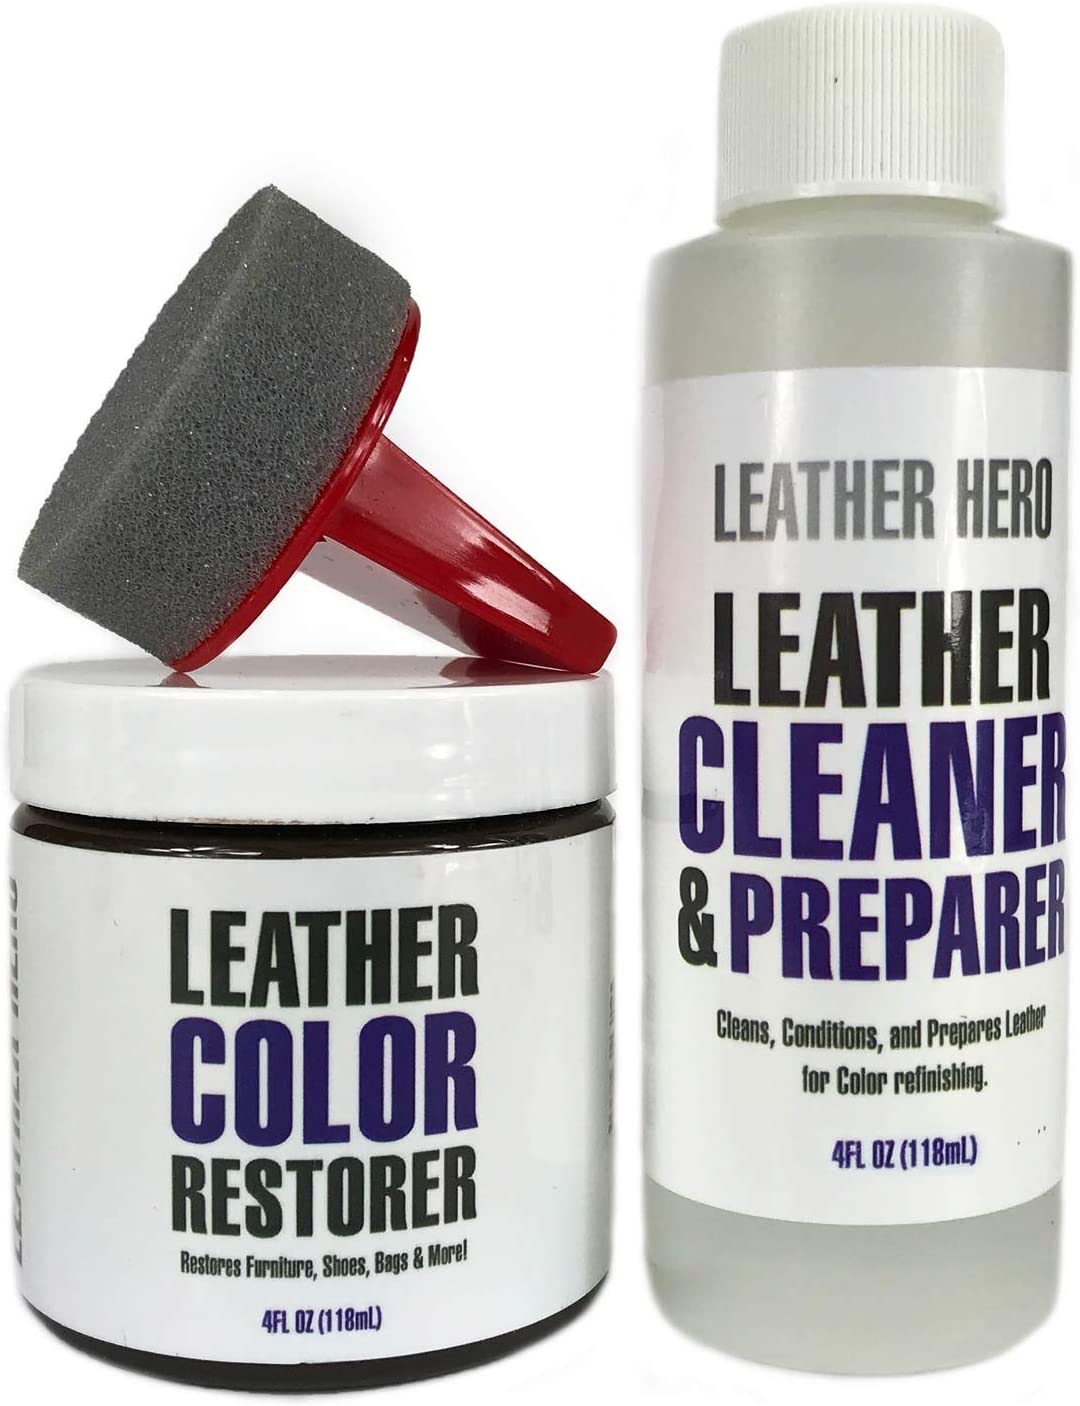 Leather Hero Leather Color Restorer for Couches, Leather Scratch Remover,  Leather Couch Scratch Repair for Furniture and Car Seats - Non-Toxic, Made